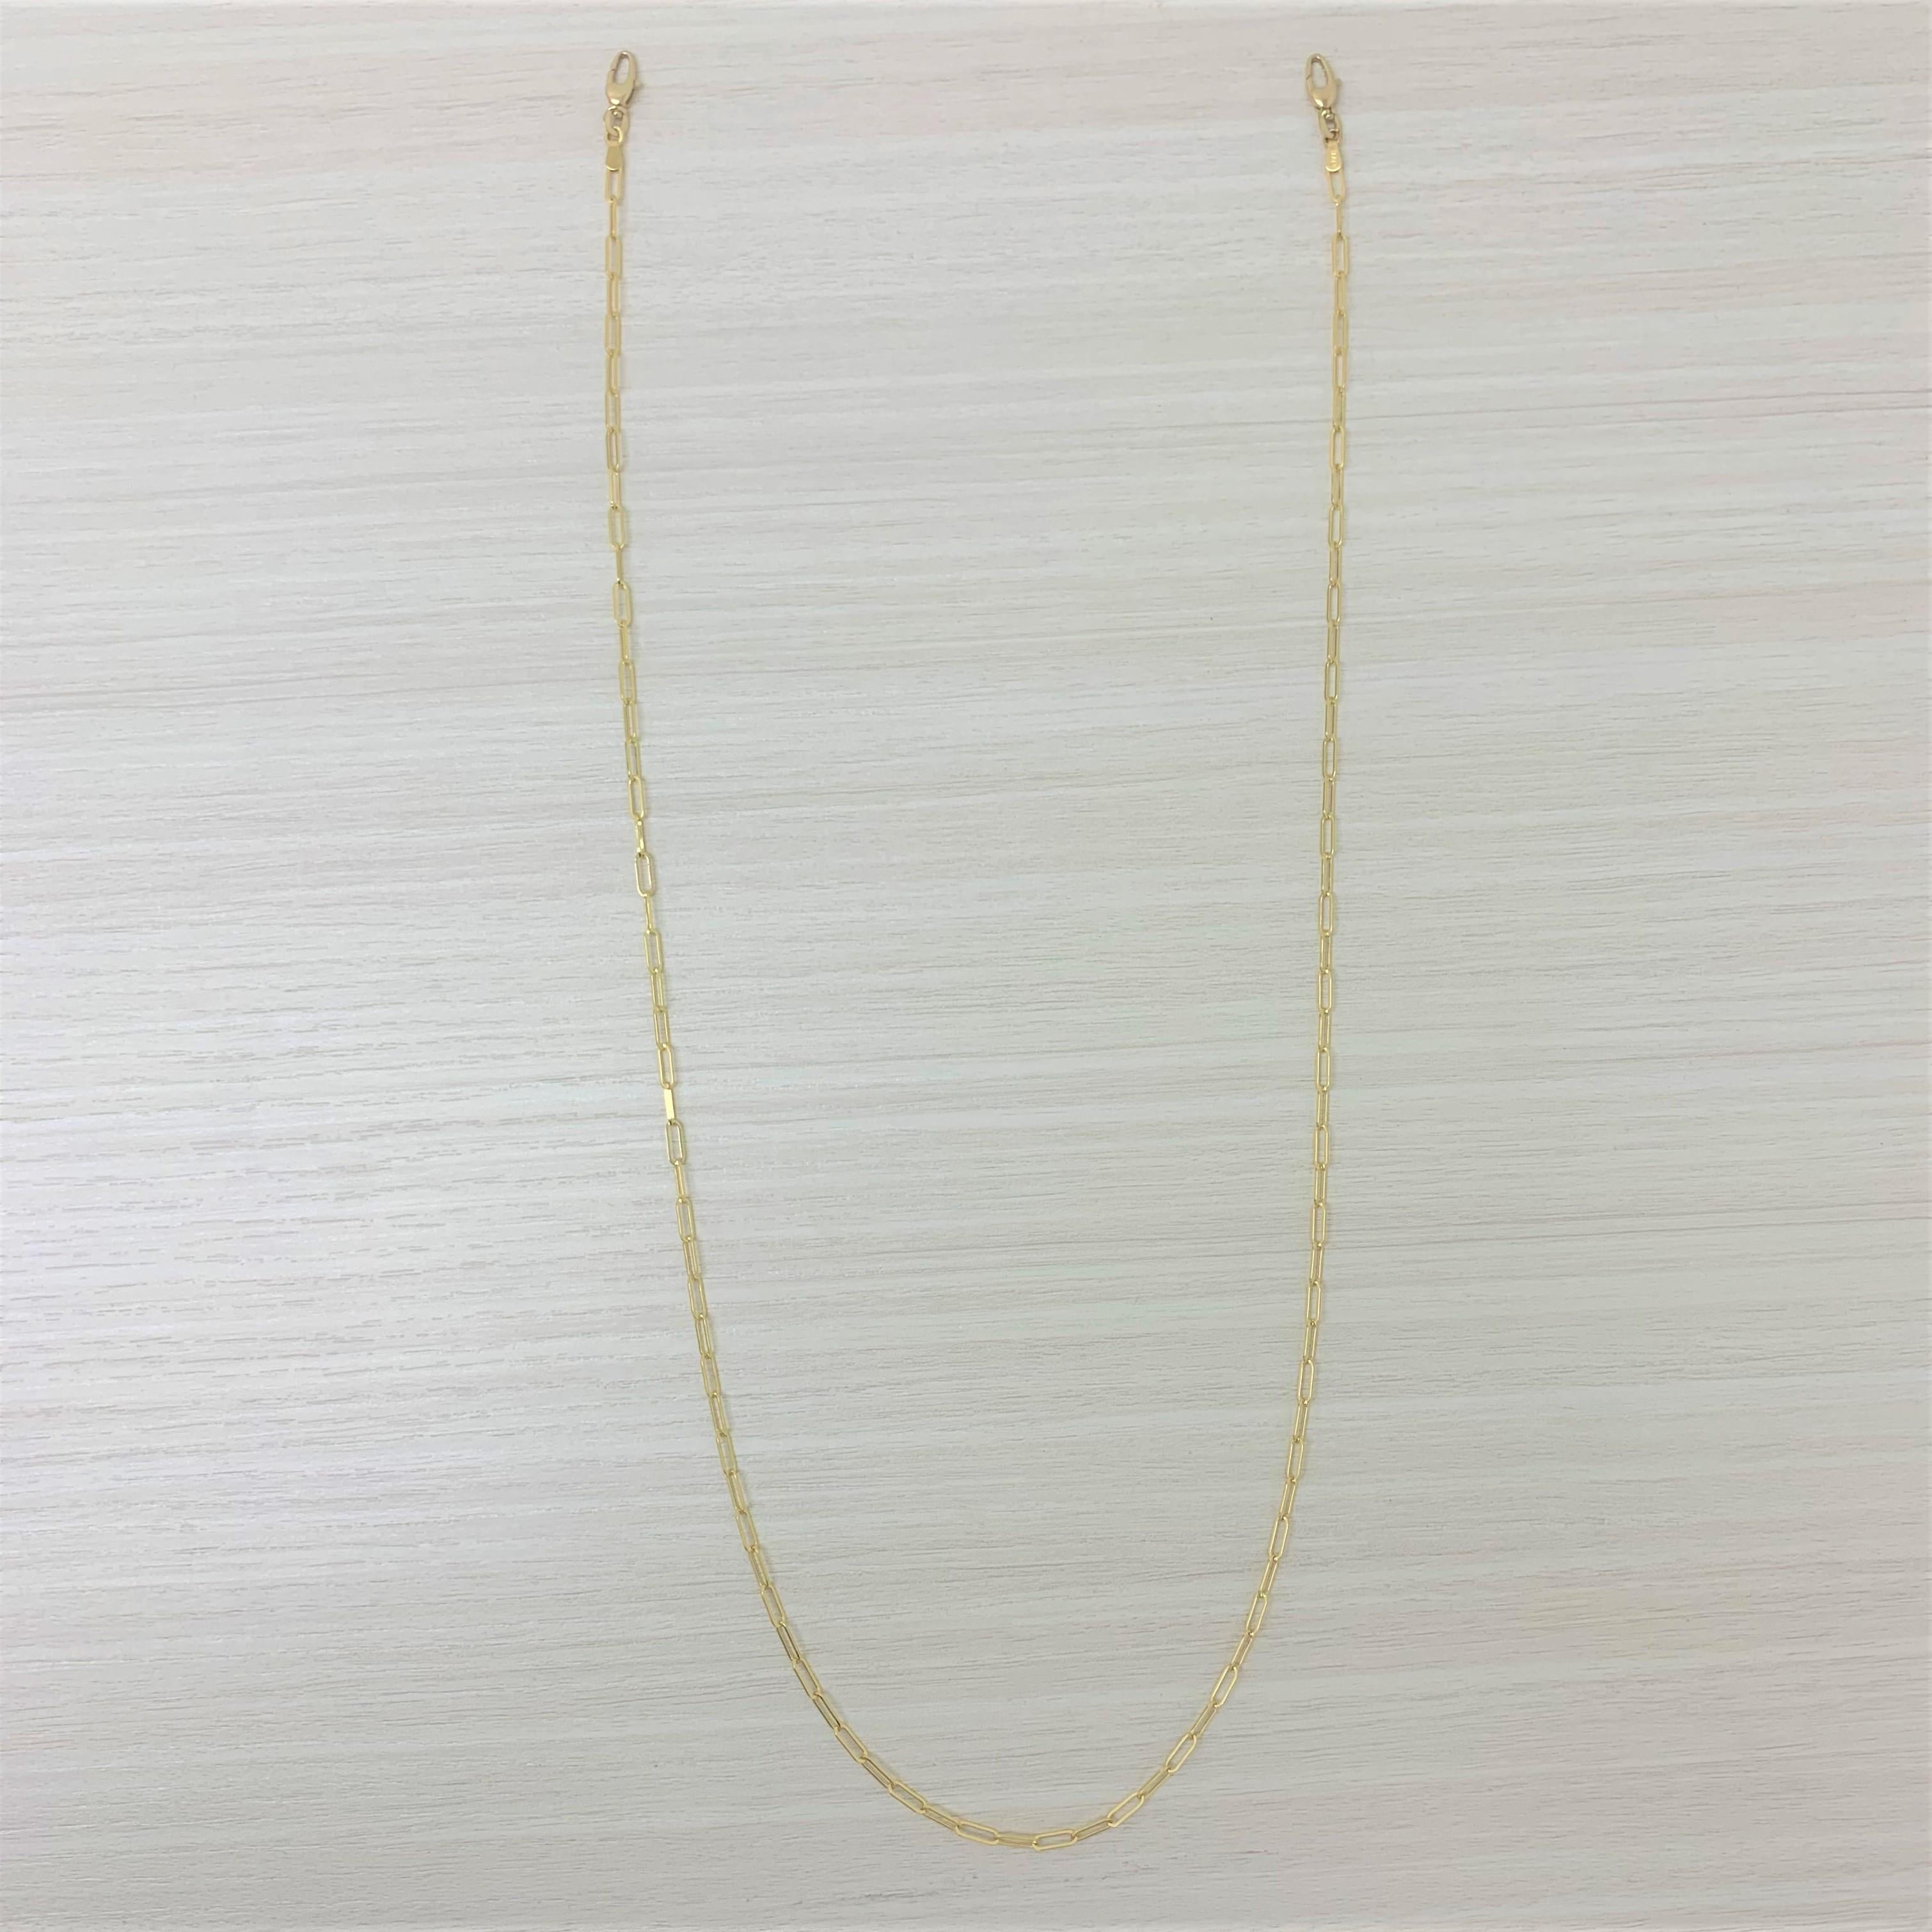 Women's 14 Karat Yellow Gold Paper Clip Mask Chain Necklace, Made in Italy For Sale